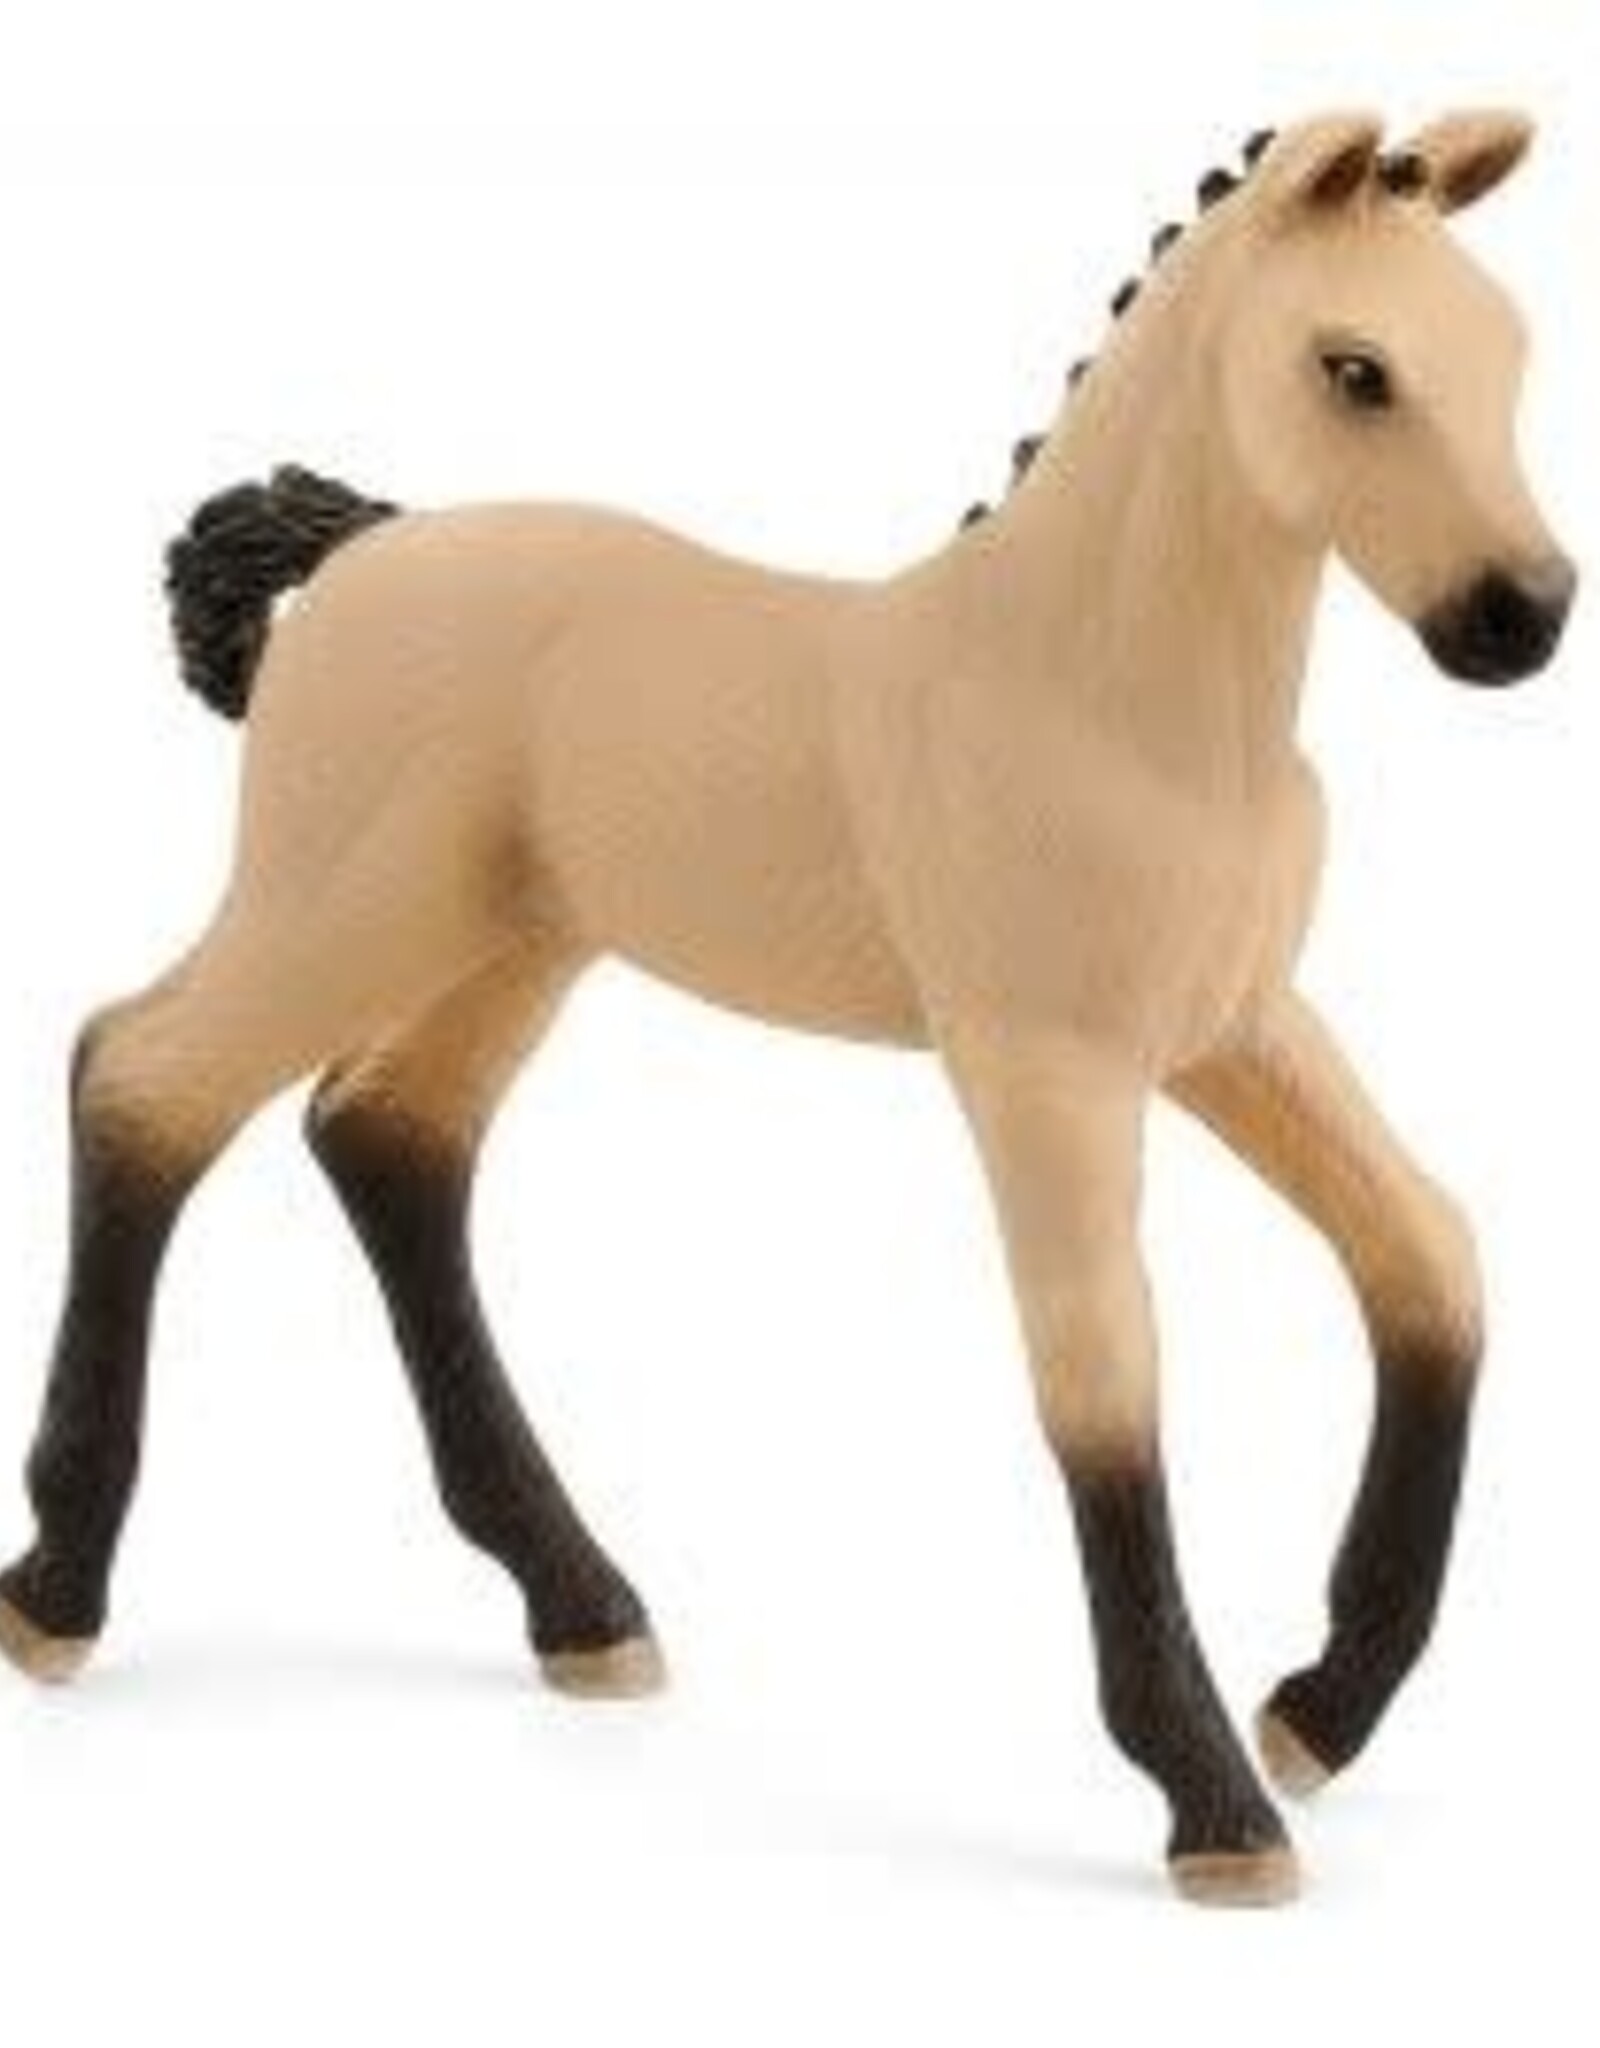 Schleich Hannoverian Foal, Red Dun 13929